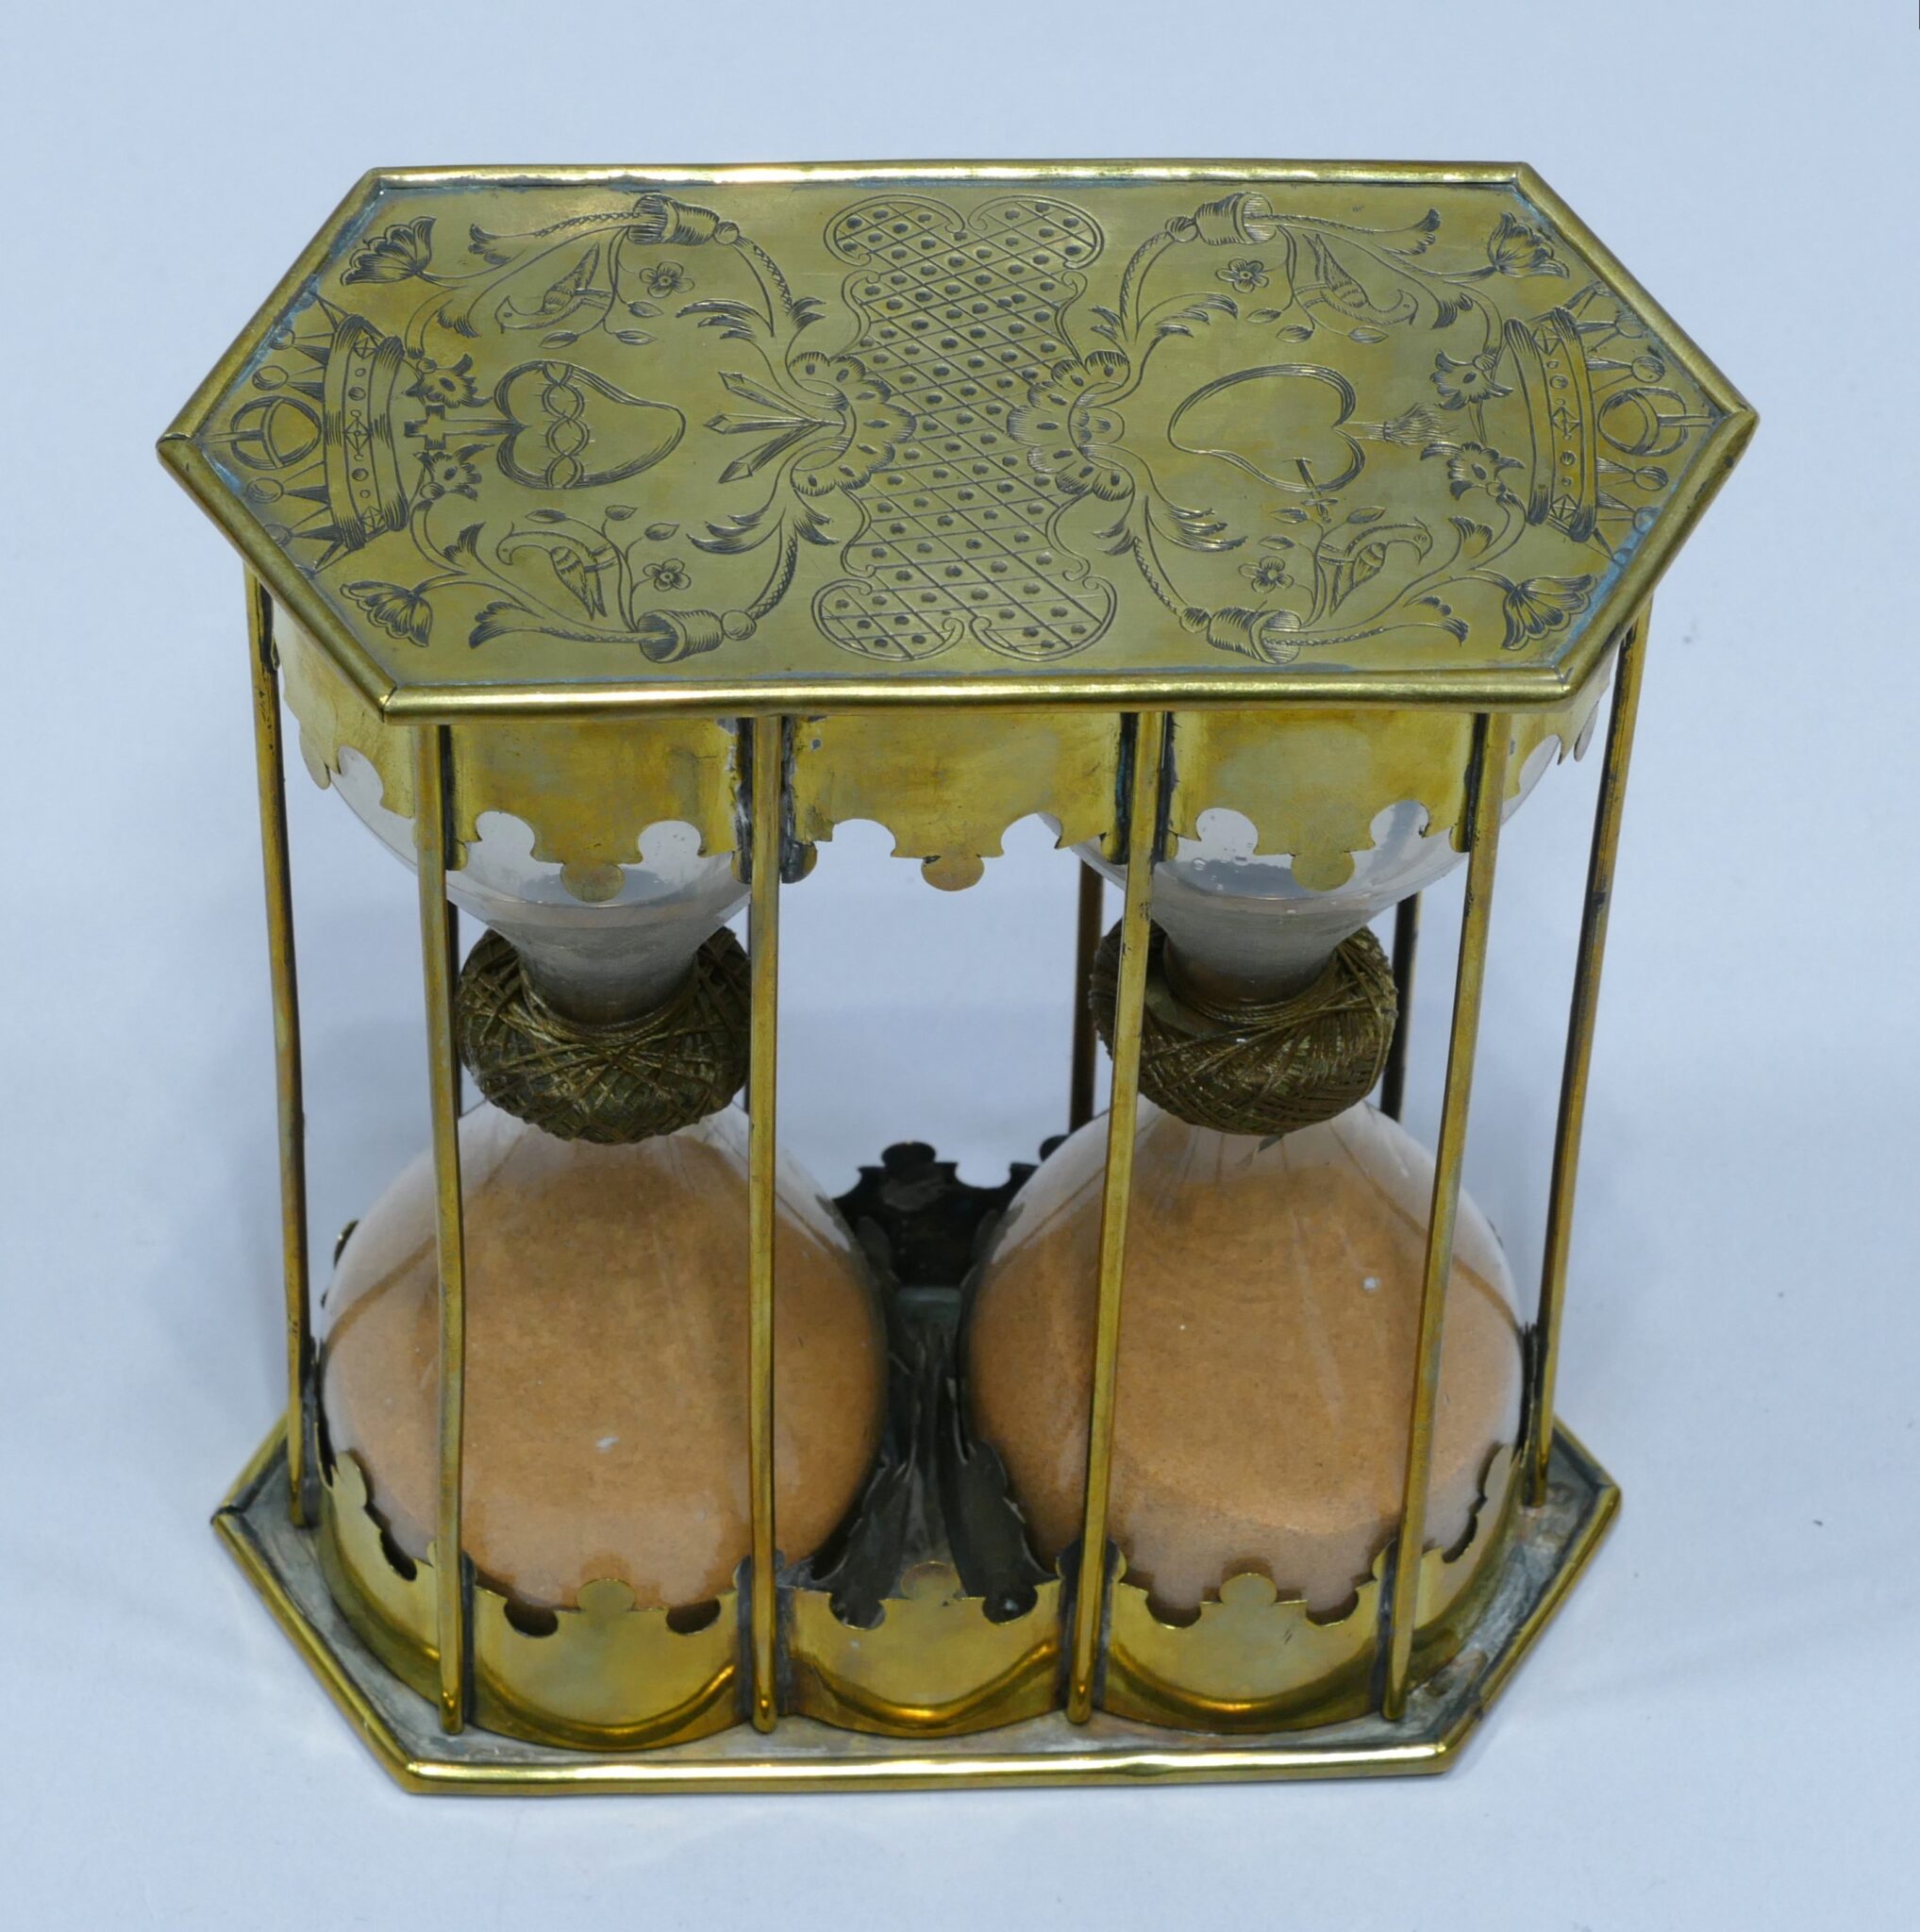 17th century brass double hourglass made for an ecclesiastic